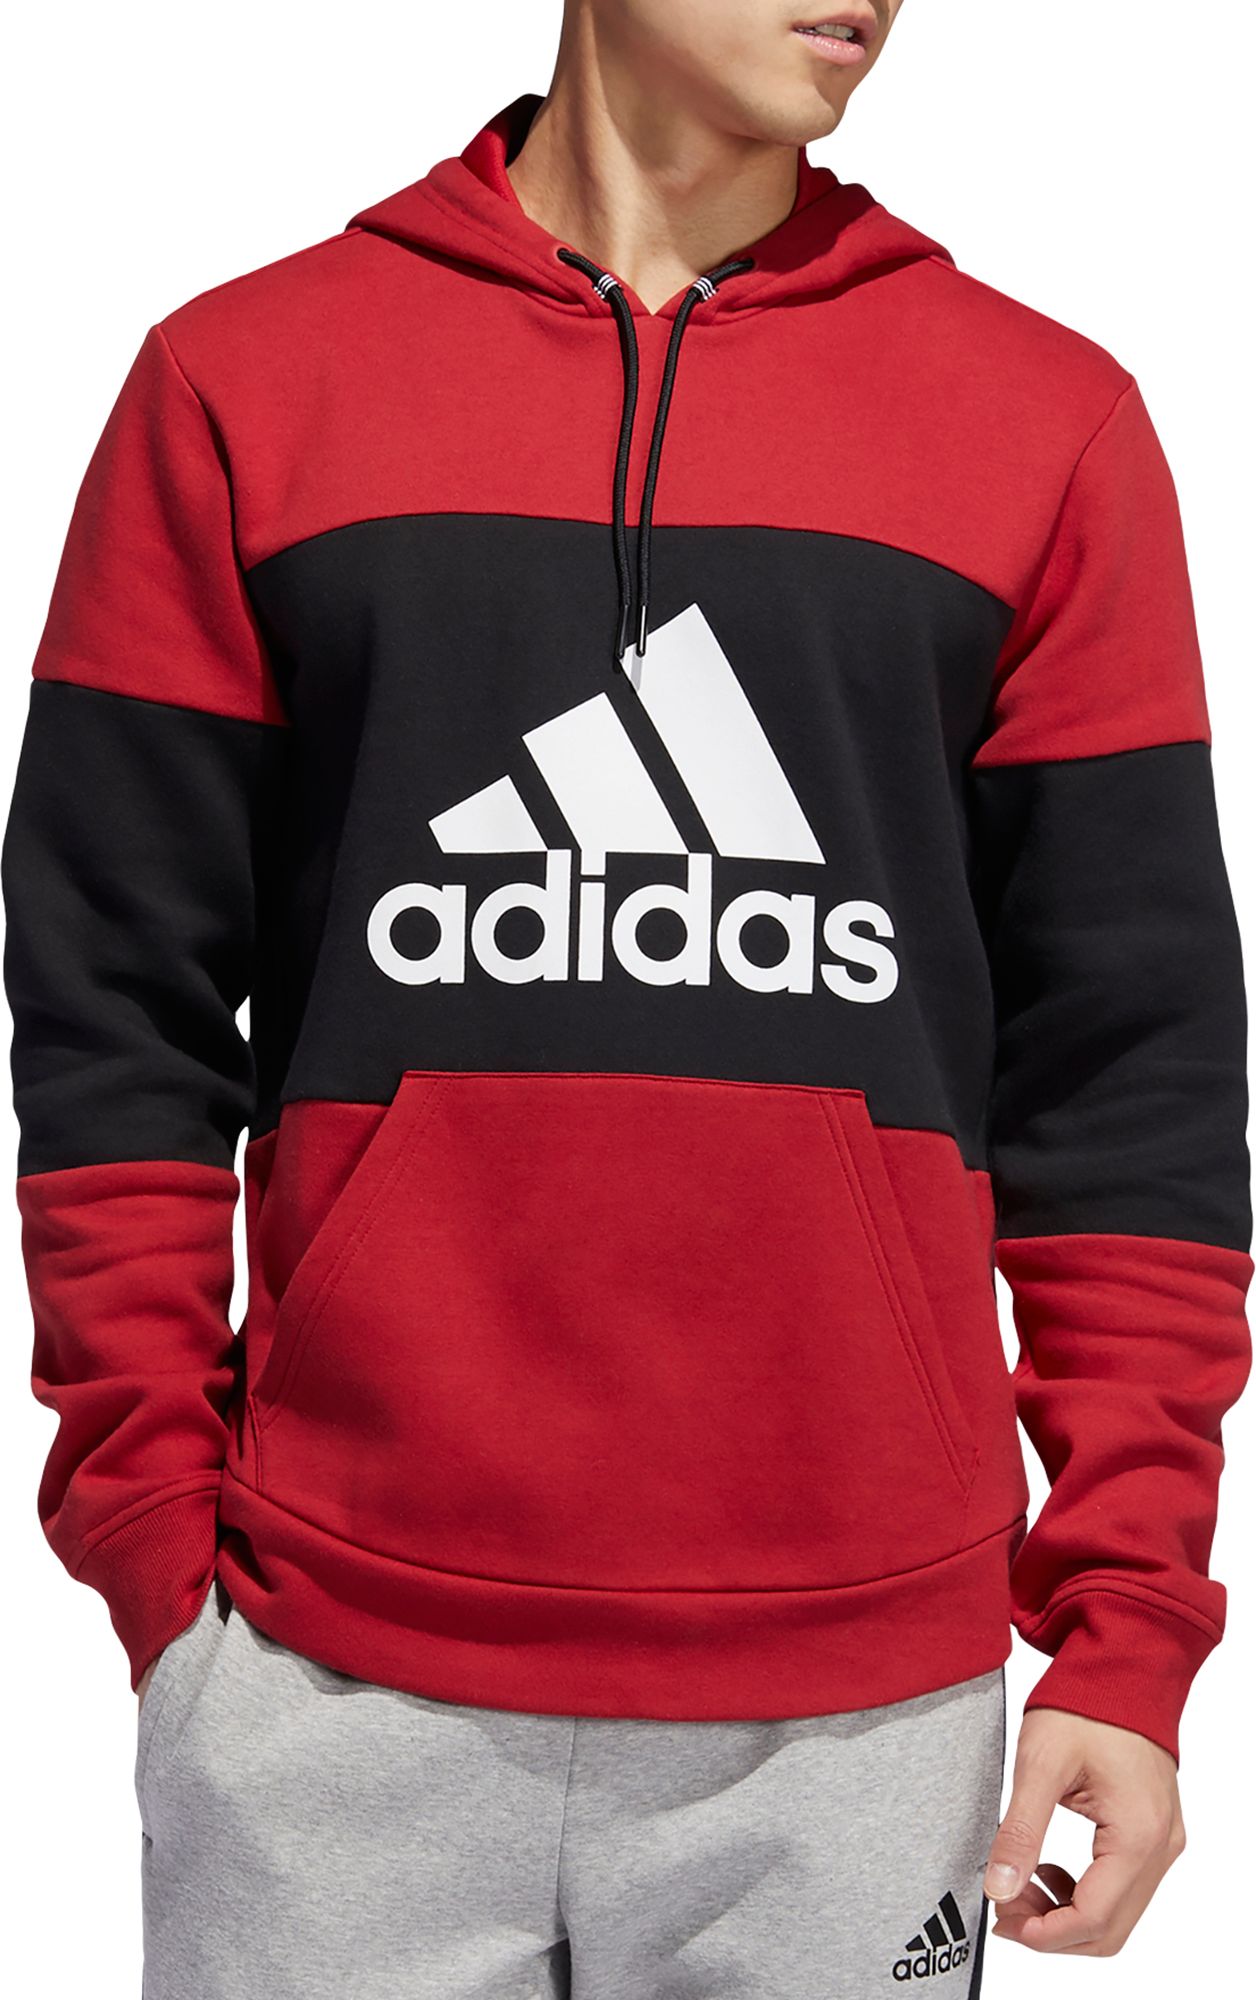 red and black adidas jumper